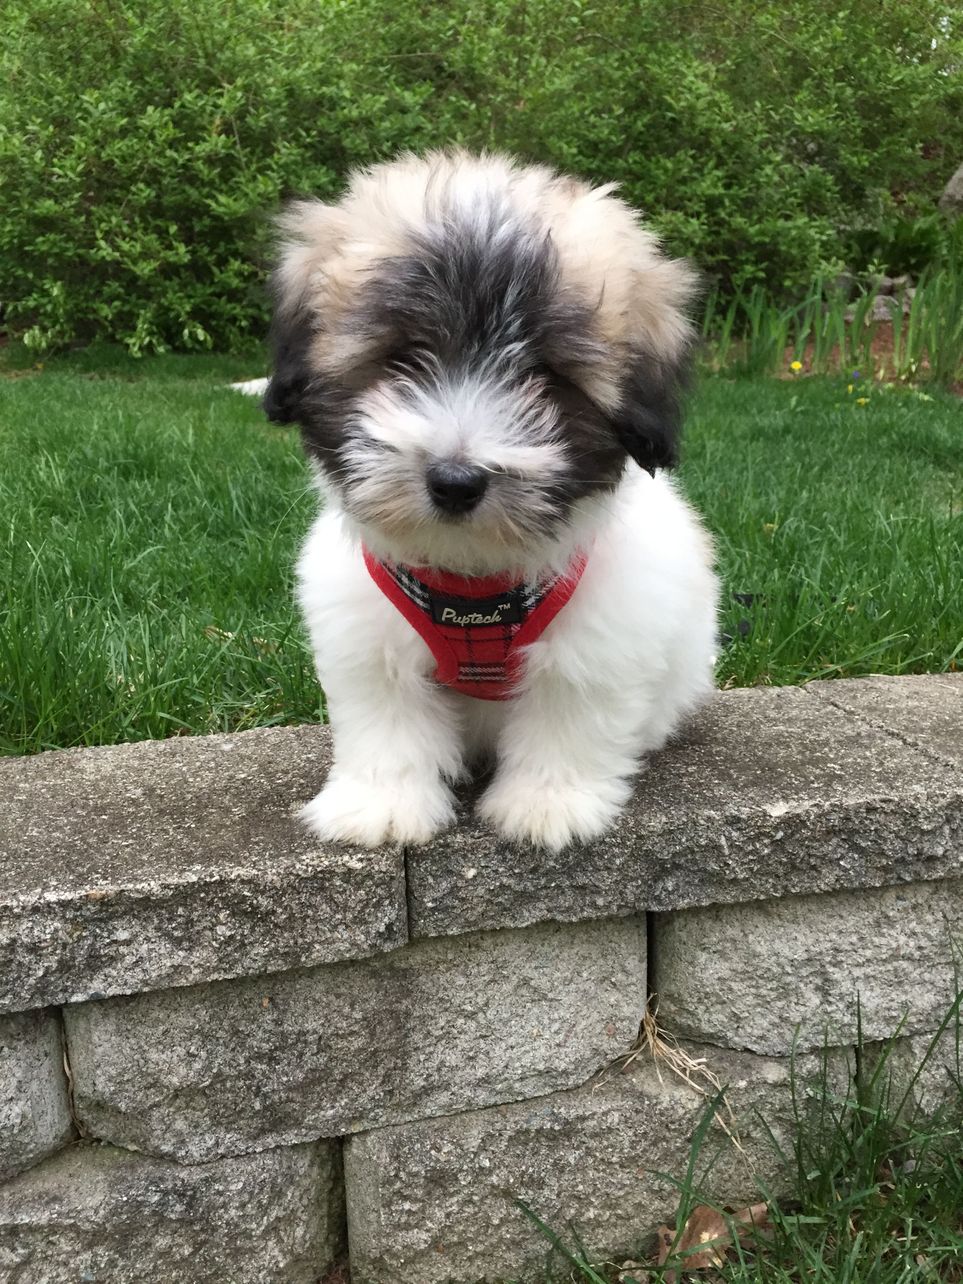 What should I expect as the price for a Coton de Tulear puppy?